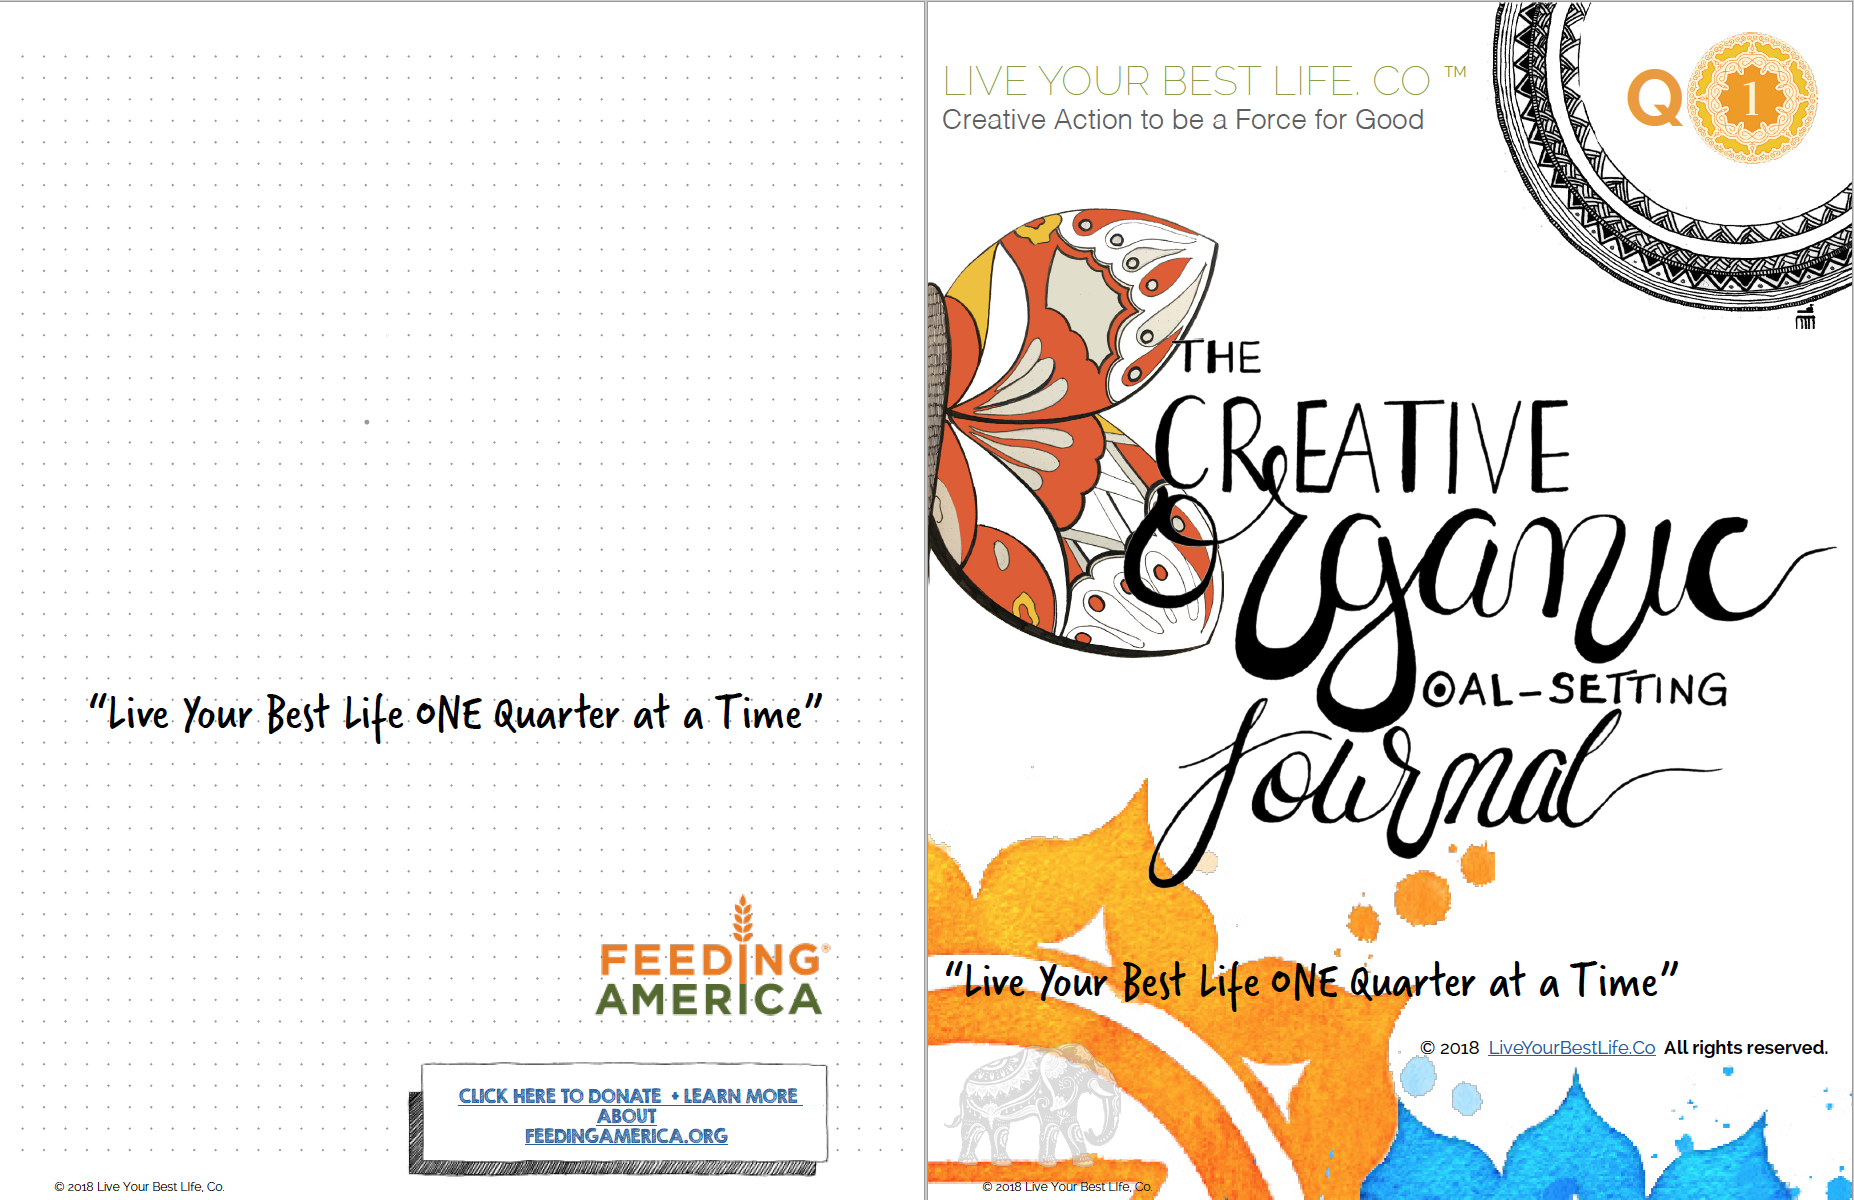 Creative Organic Goal Setting Journal - Live You Best Life One Quarter at a Time 2018 - Q1.png